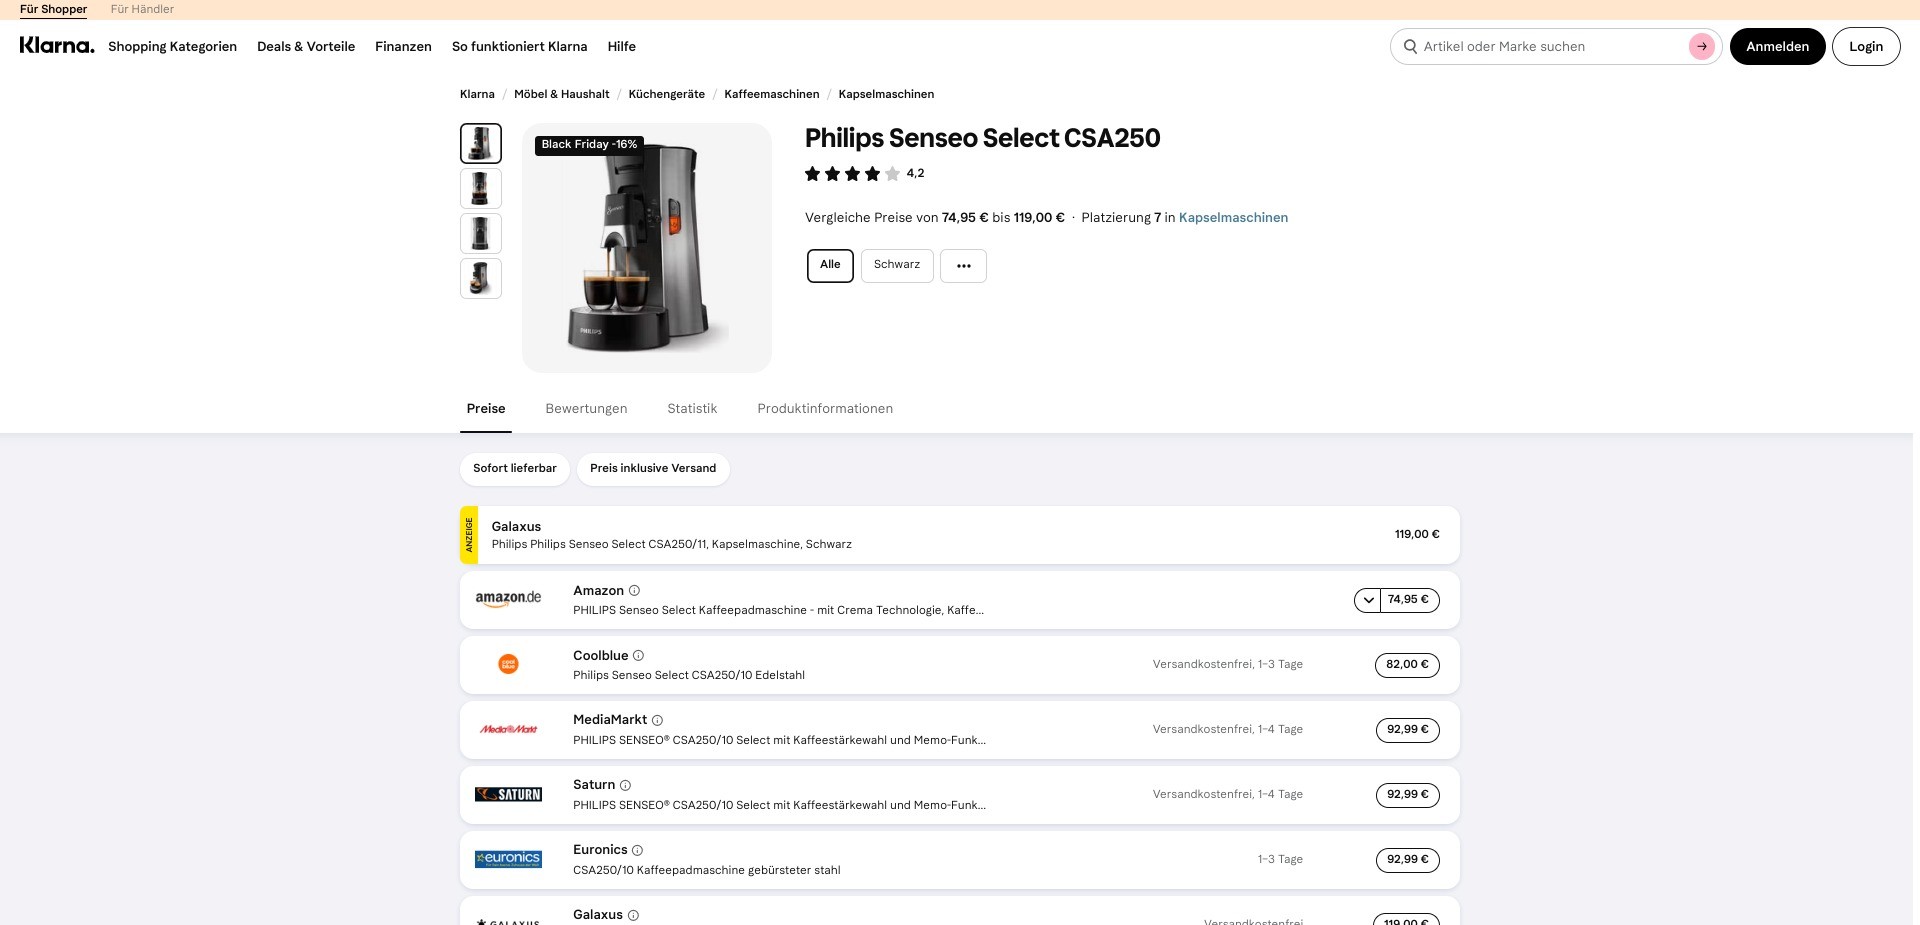 Screenshot of a random product listing on klarna.com displaying a product and its availabilities on different marketplaces 